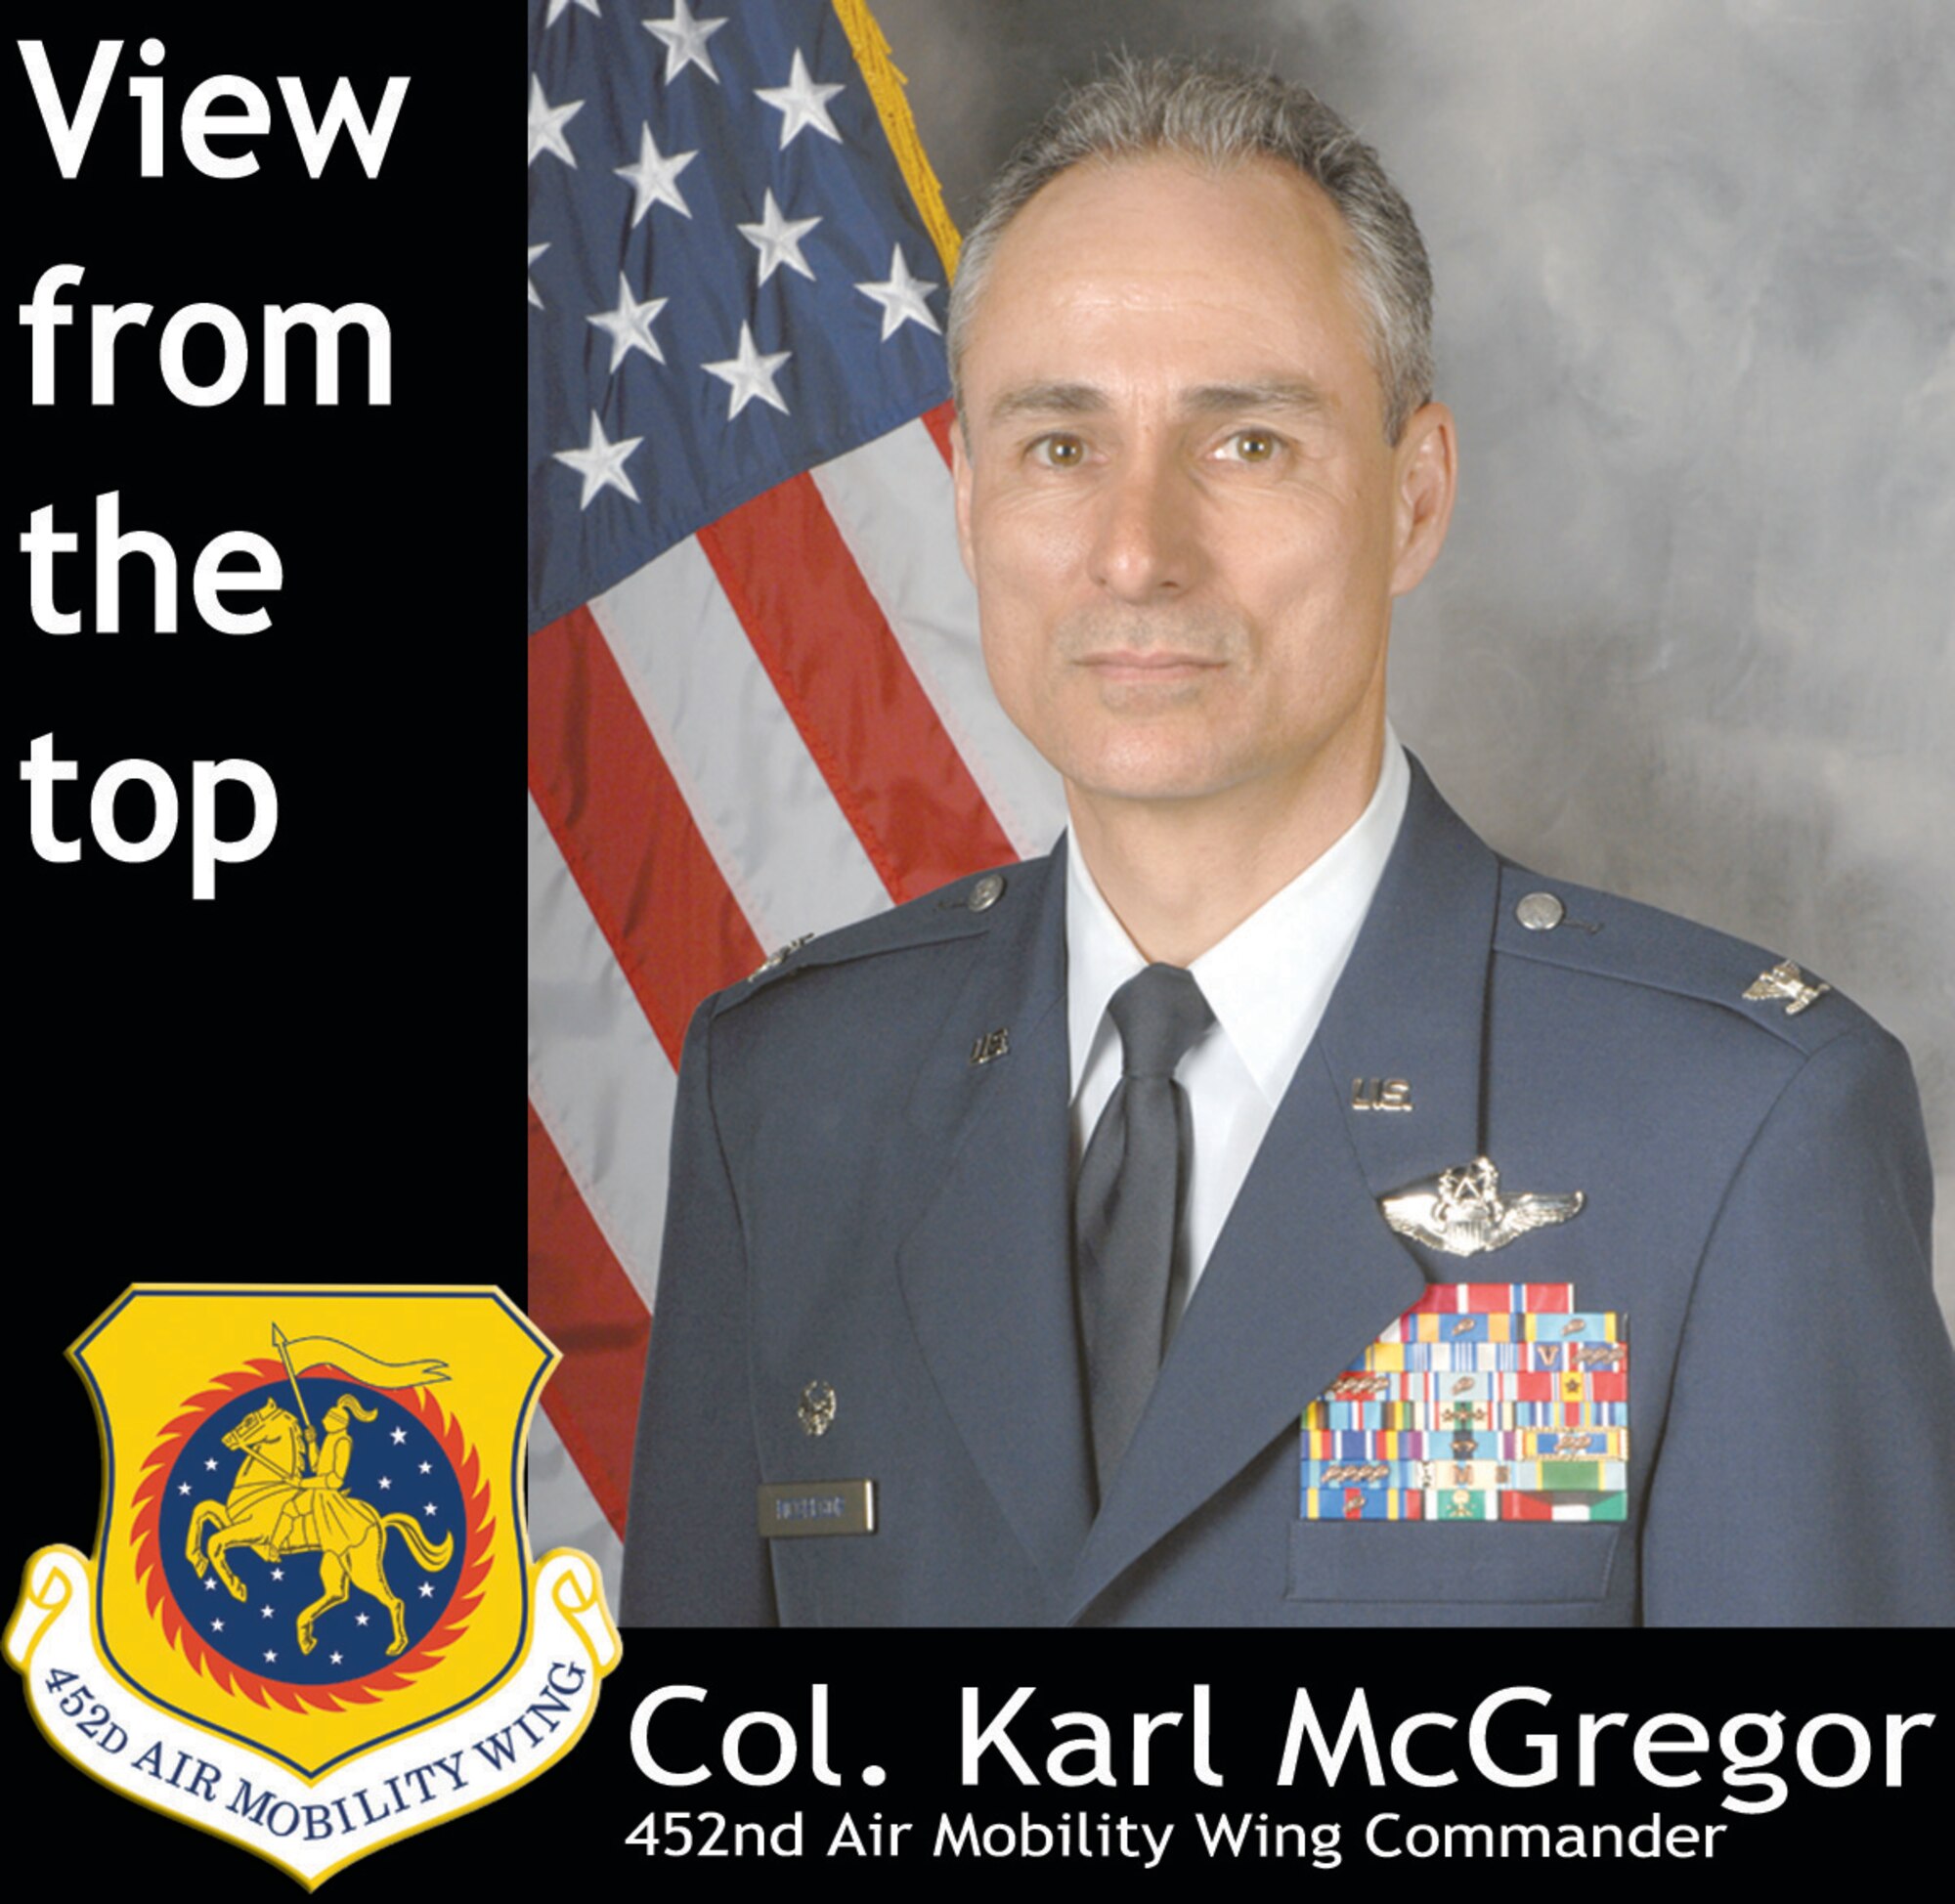 "View from the top" is a bi-monthy column for The Beacon newspaper at March Air Reserve Base written by 452nd Air Mobility Wing Commander Col. Karl McGregor.  Official photo is by Staff Sgt. Paul Duquette.  